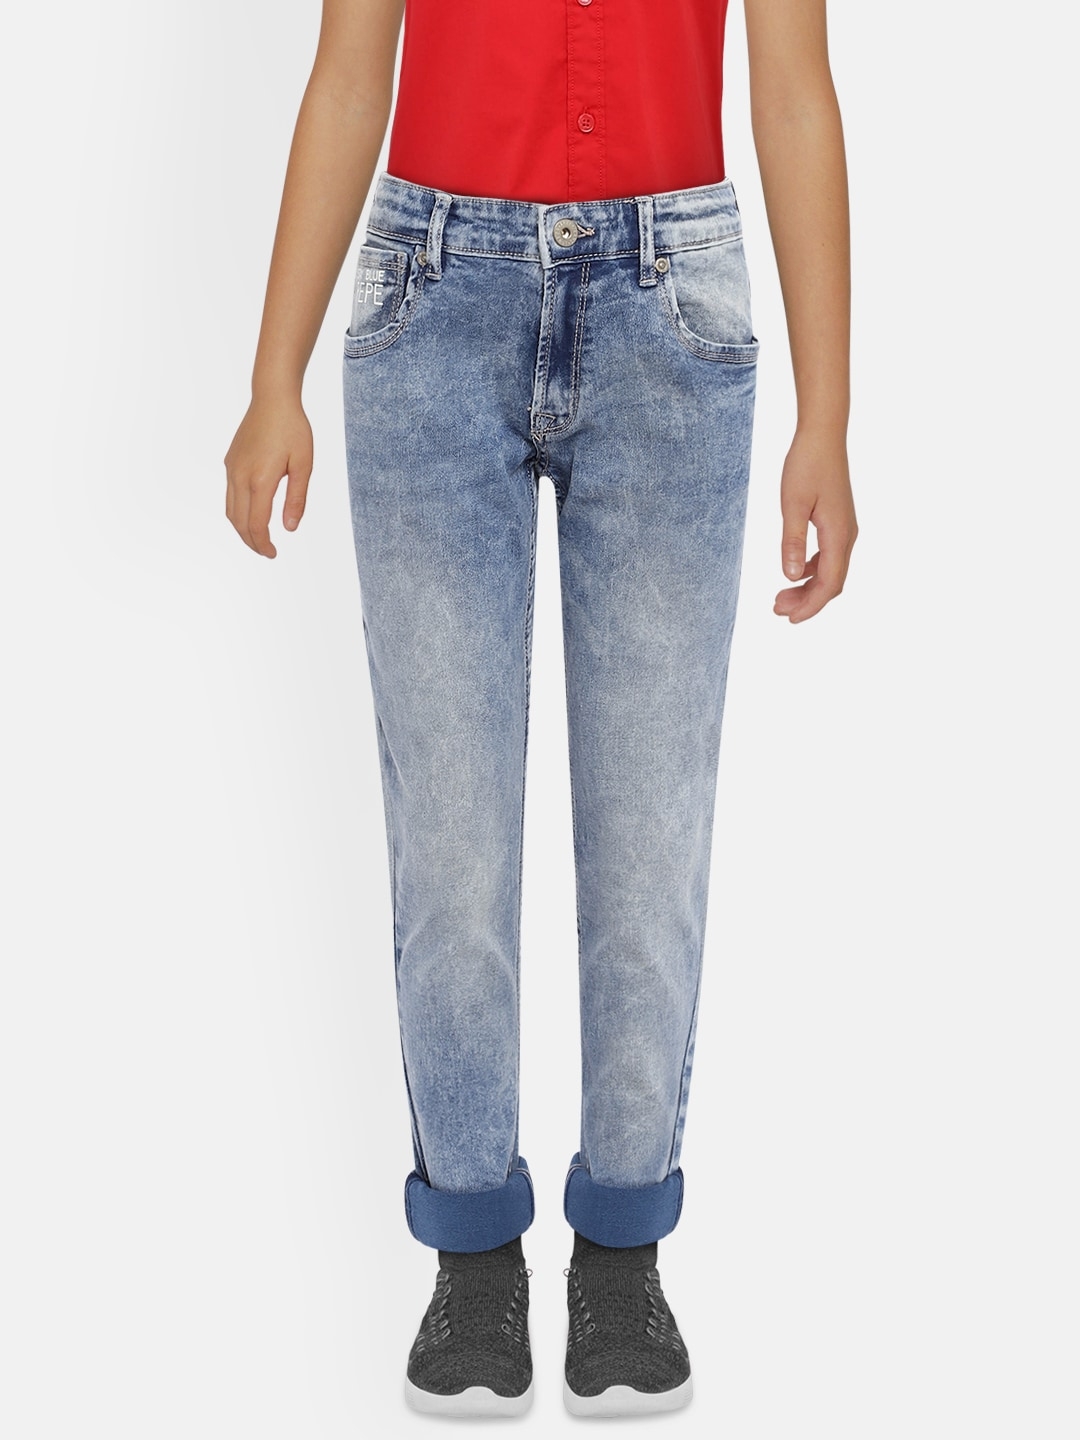 Pepe Jeans | Pepe Jeans Boys Jeans